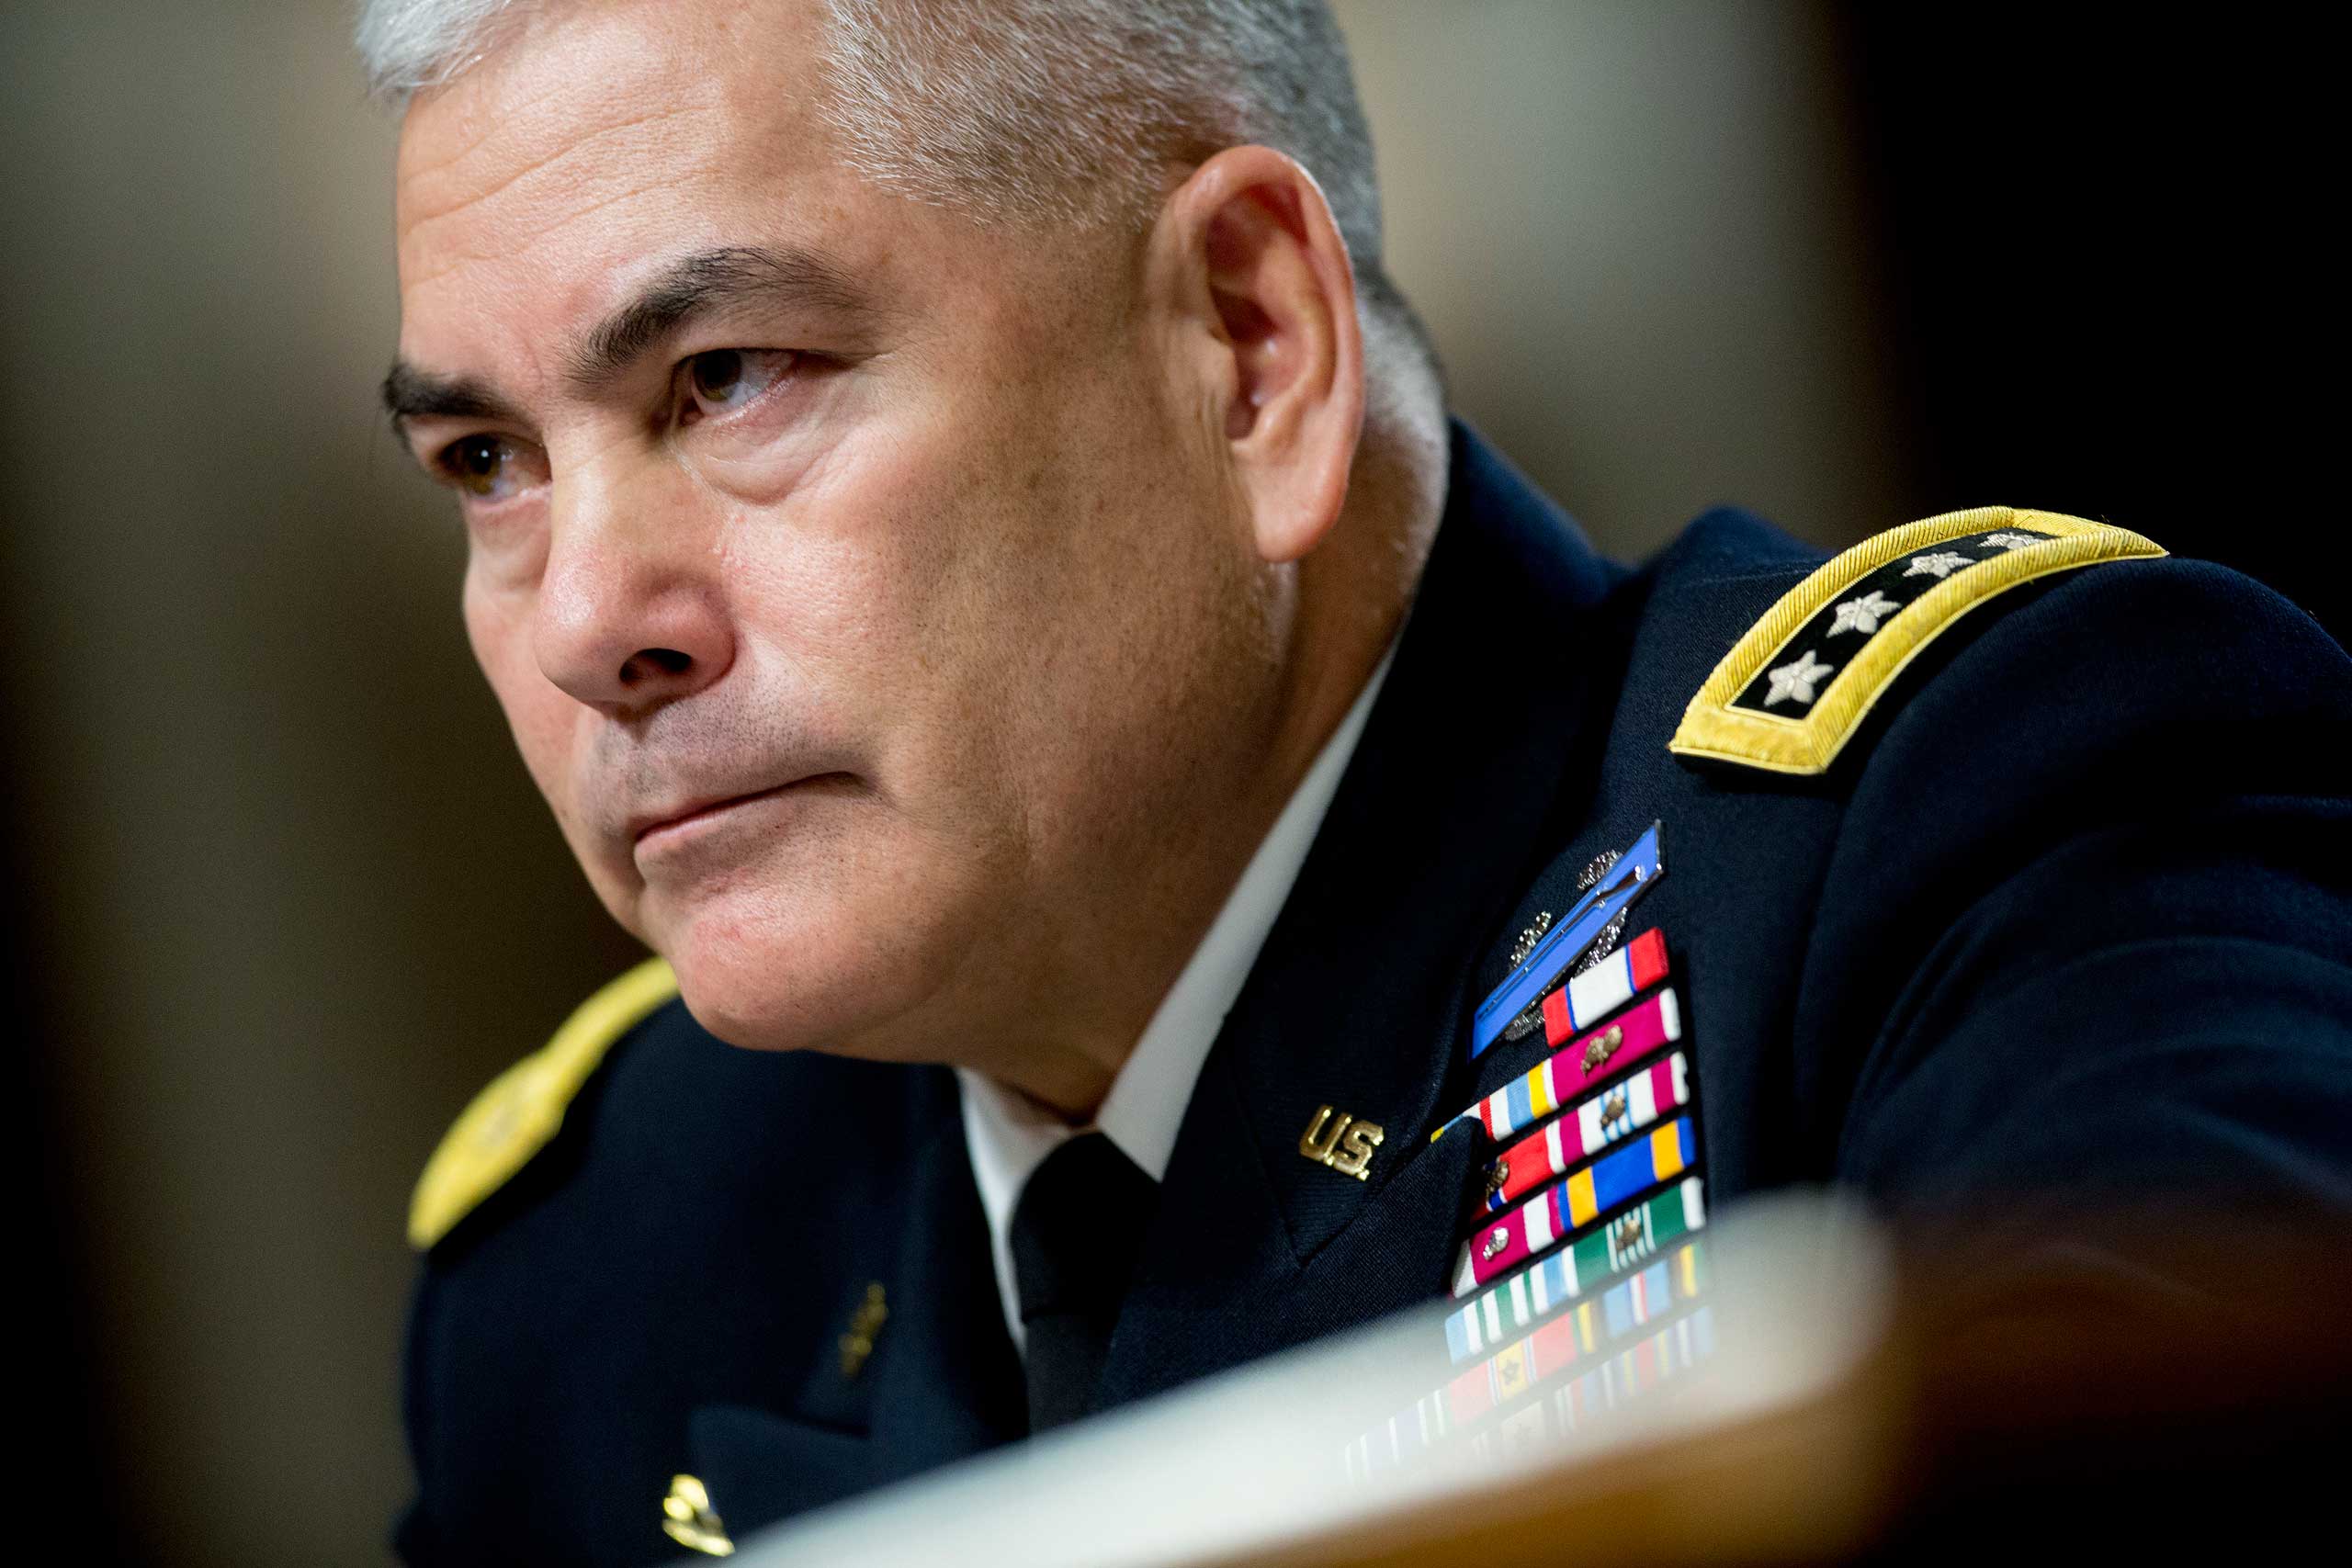 Army General John Campbell, commander of the U.S. forces in Afghanistan, listens during a Senate Armed Services Committee hearing in Washington, D.C., U.S., on Feb. 12, 2015. (Bloomberg/Getty Images)